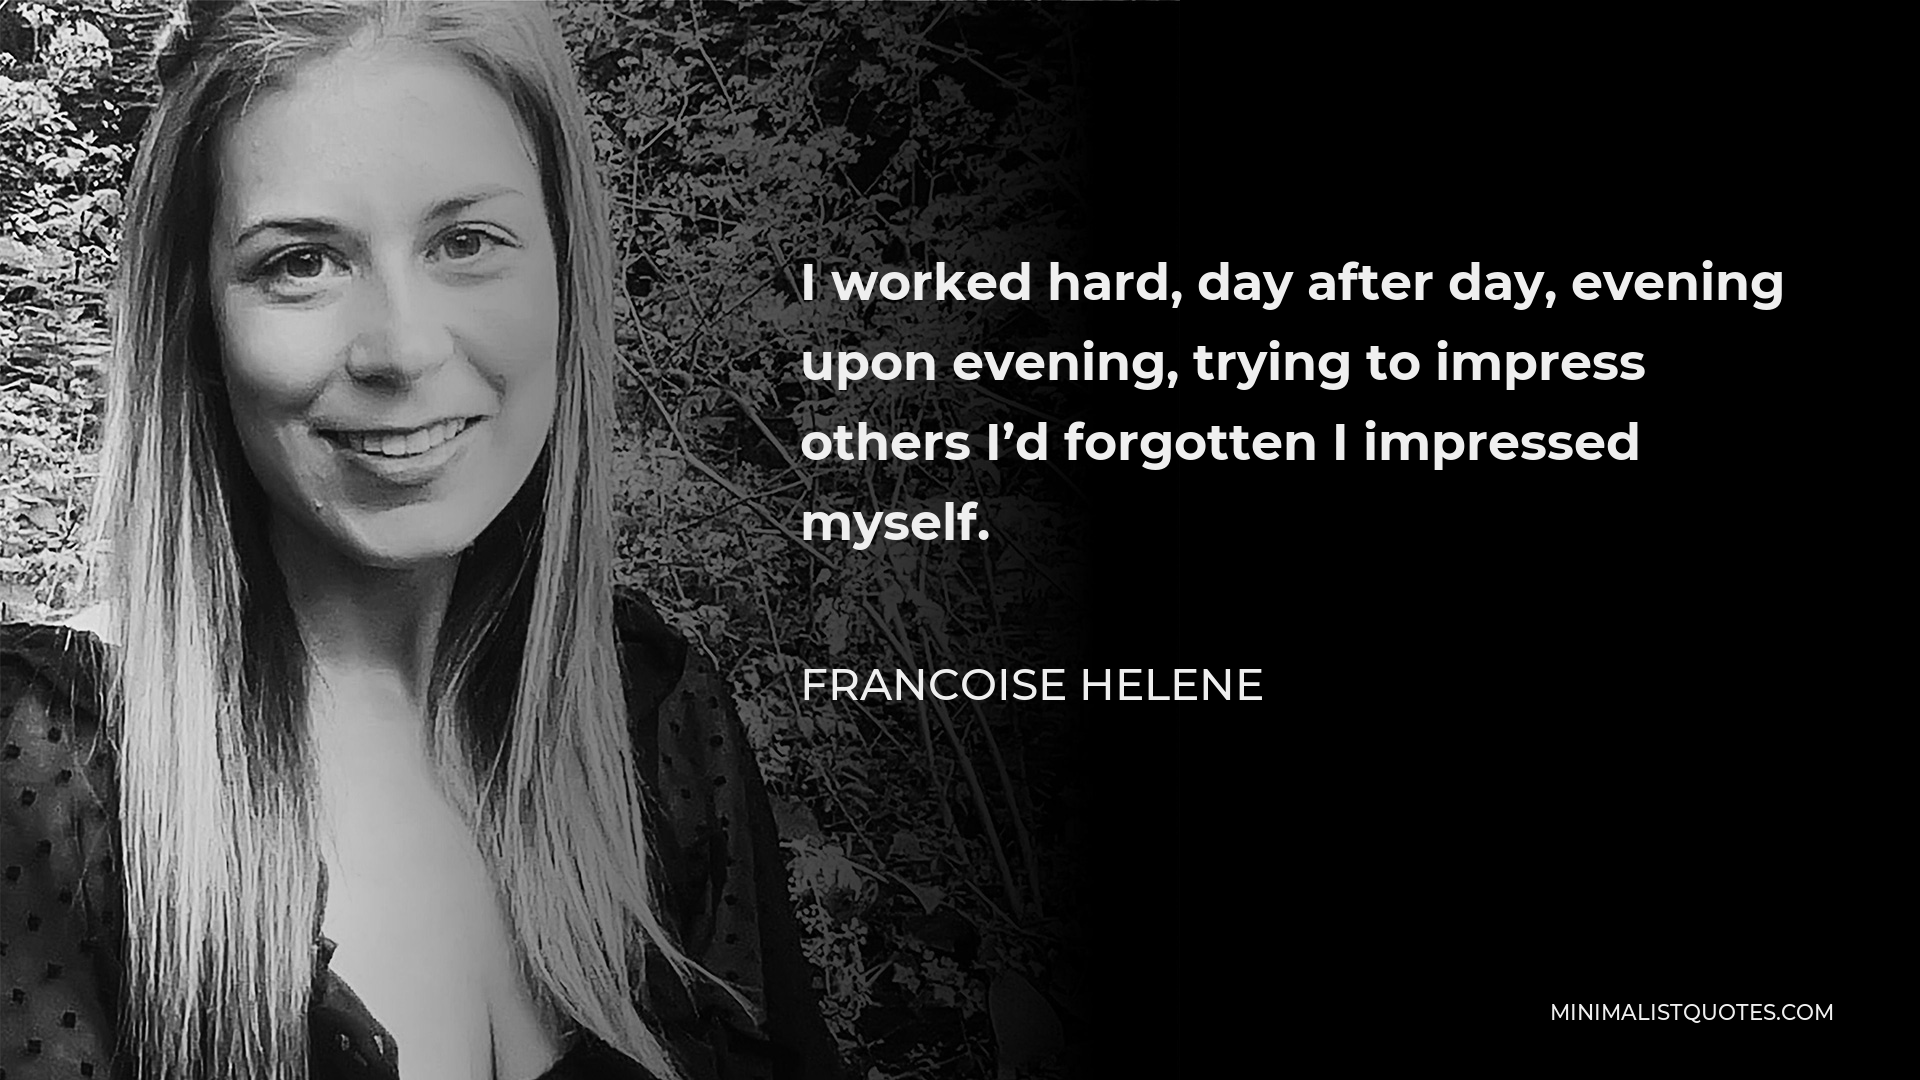 Francoise Helene Quote - I worked hard, day after day, evening upon evening, trying to impress others I’d forgotten I impressed myself.